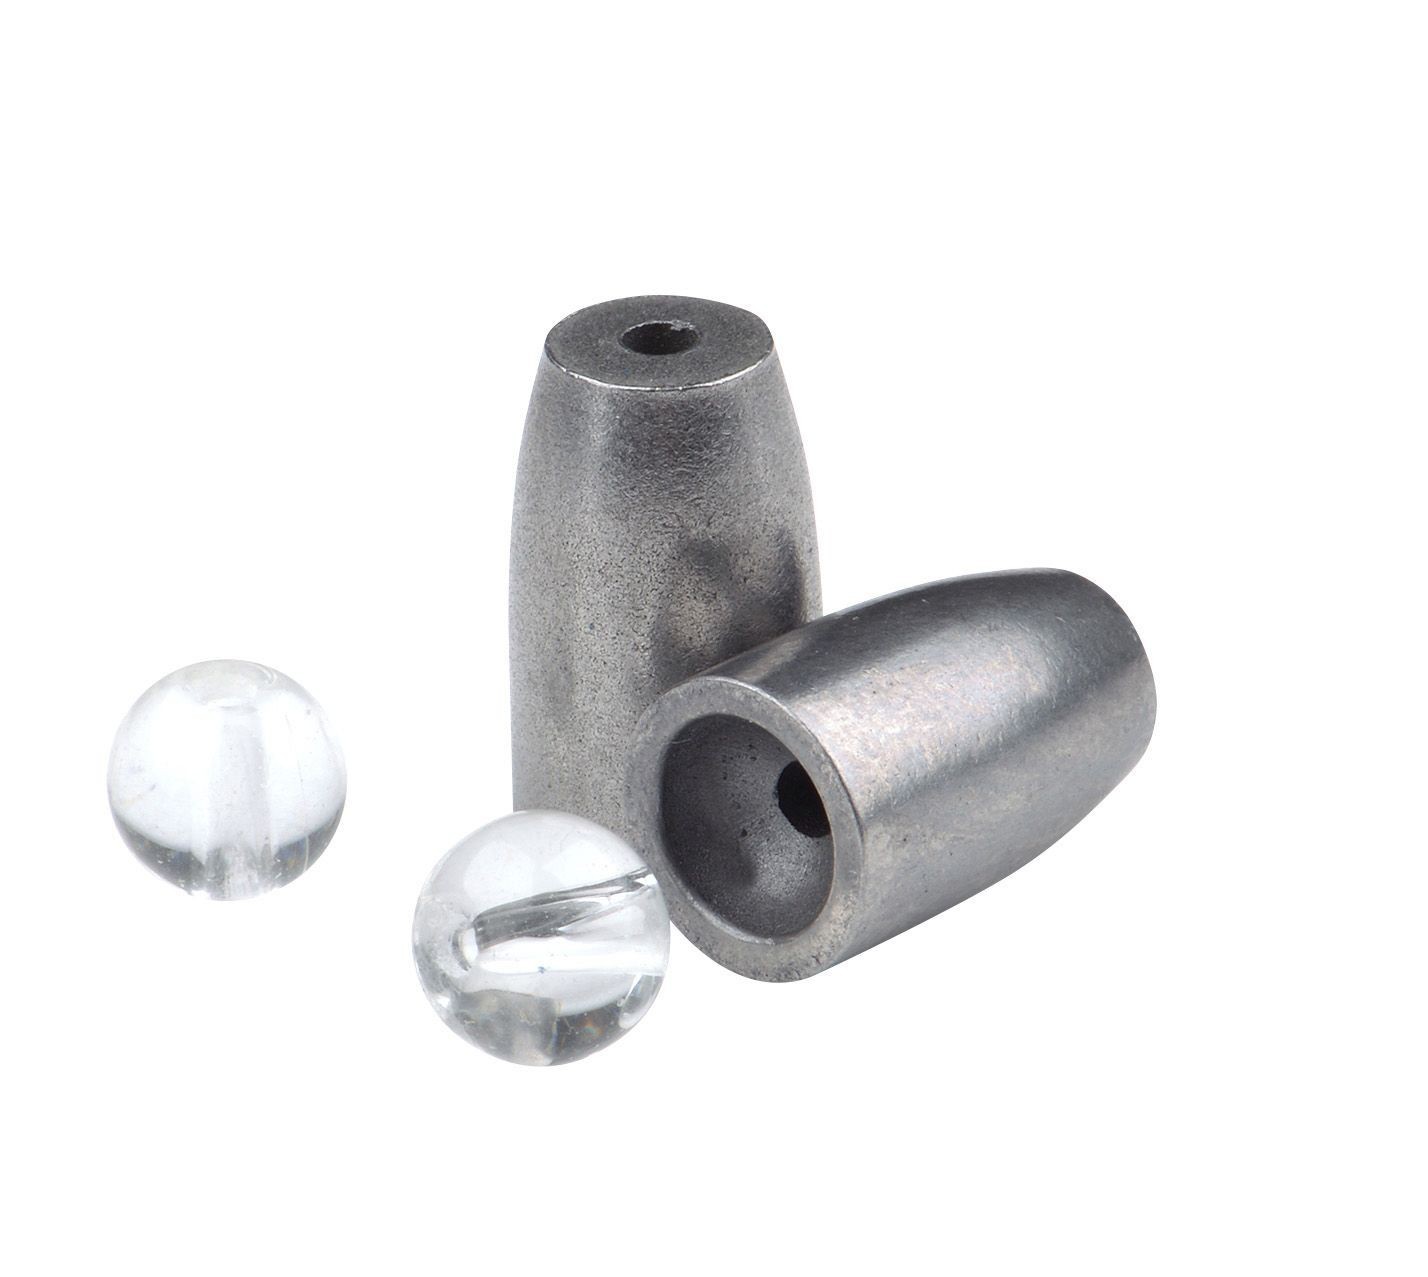 Груз SPRO Stainless Steel DS Sinkers MS 7,2гр - фото 1